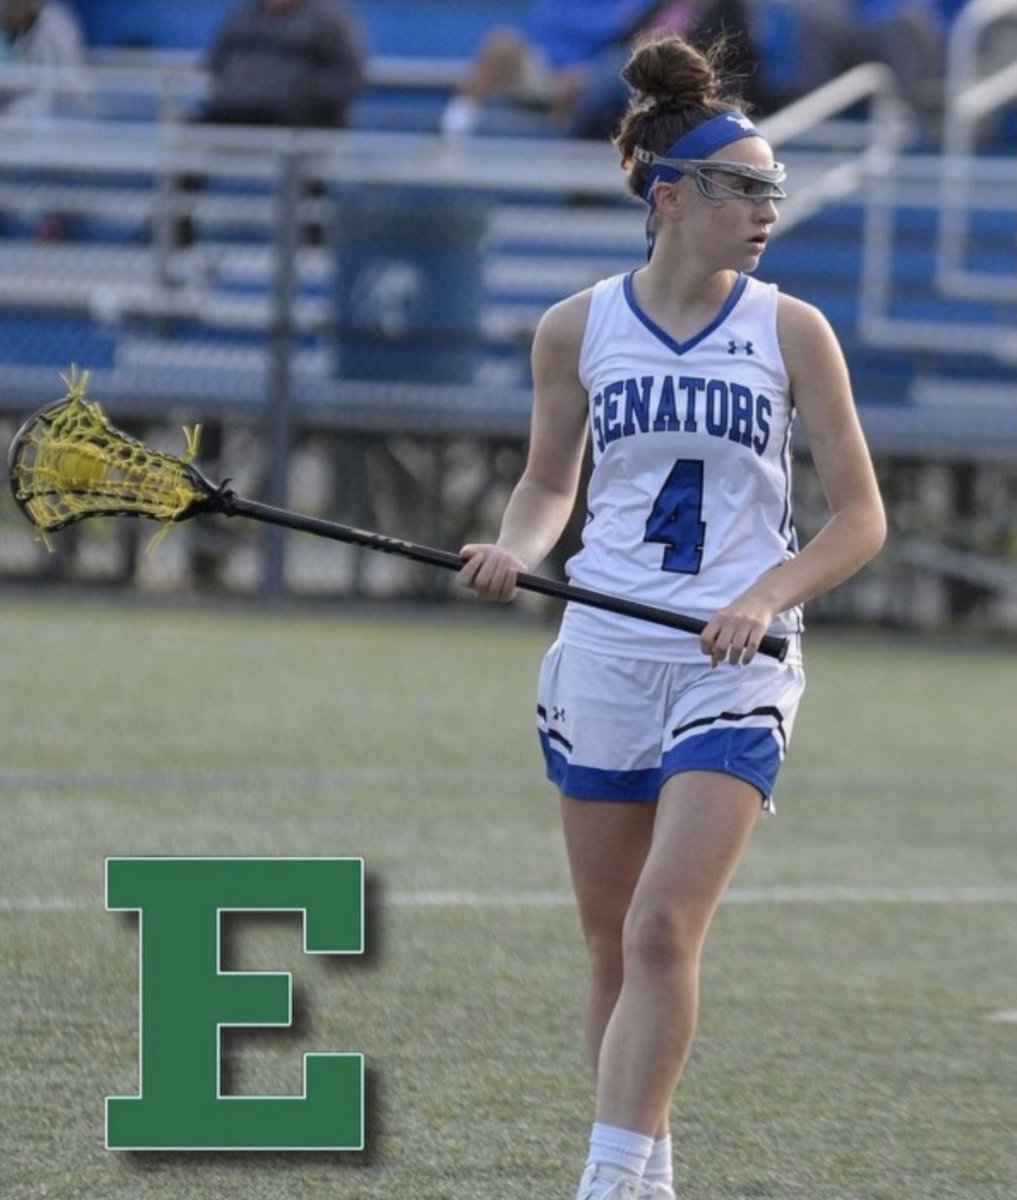 Congratulations to Junior midfielder Kyleigh Dill on her verbal commitment to D1 Eastern Michigan University! #D1lax #2down1togo @DIAA_Delaware @TheStateNews @LongstrethLAX